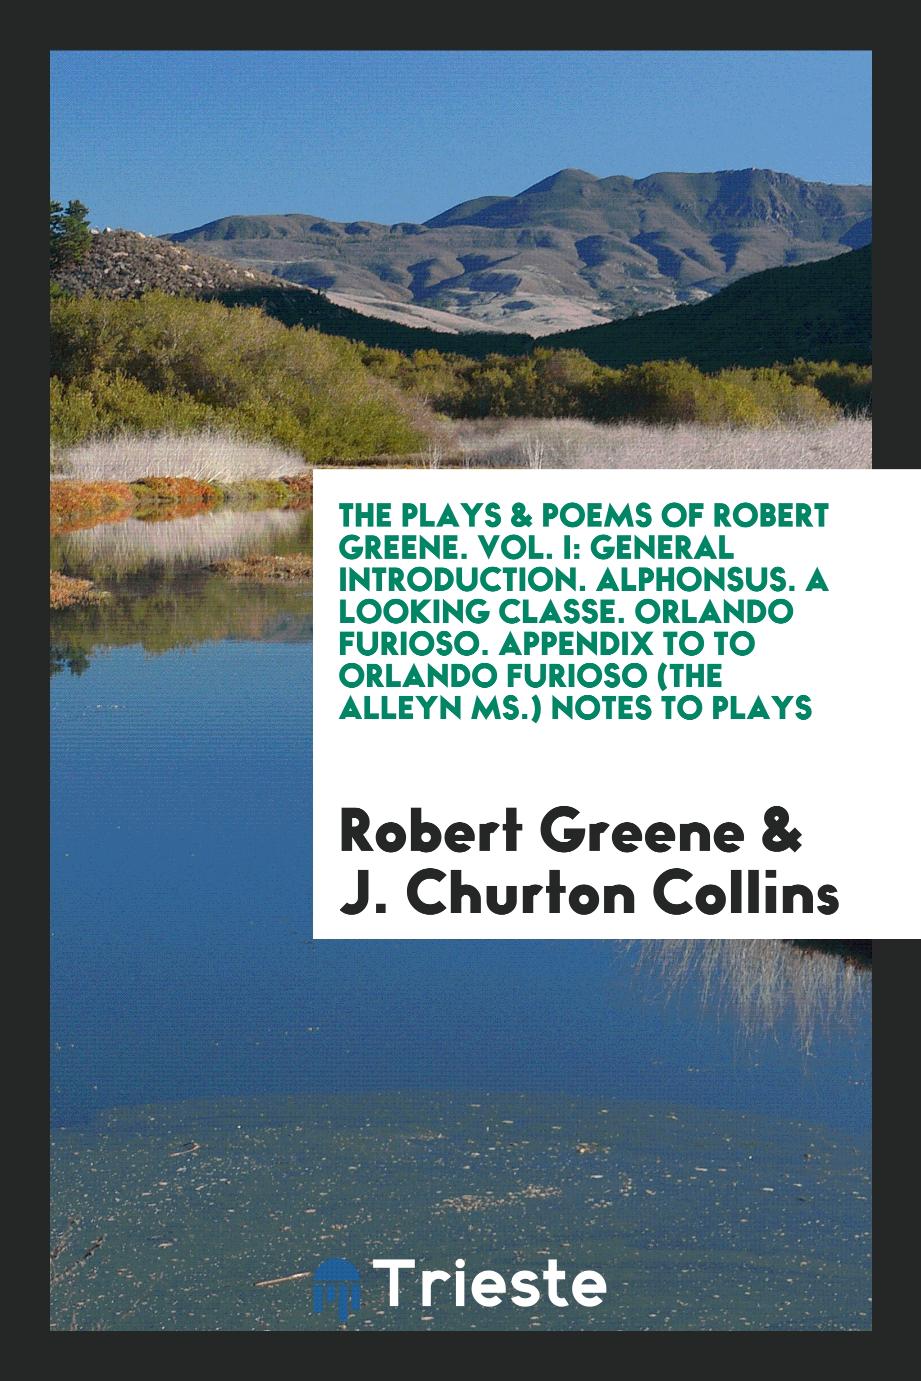 The Plays & Poems of Robert Greene. Vol. I: General Introduction. Alphonsus. A Looking Classe. Orlando Furioso. Appendix to to Orlando Furioso (The Alleyn Ms.) Notes to Plays